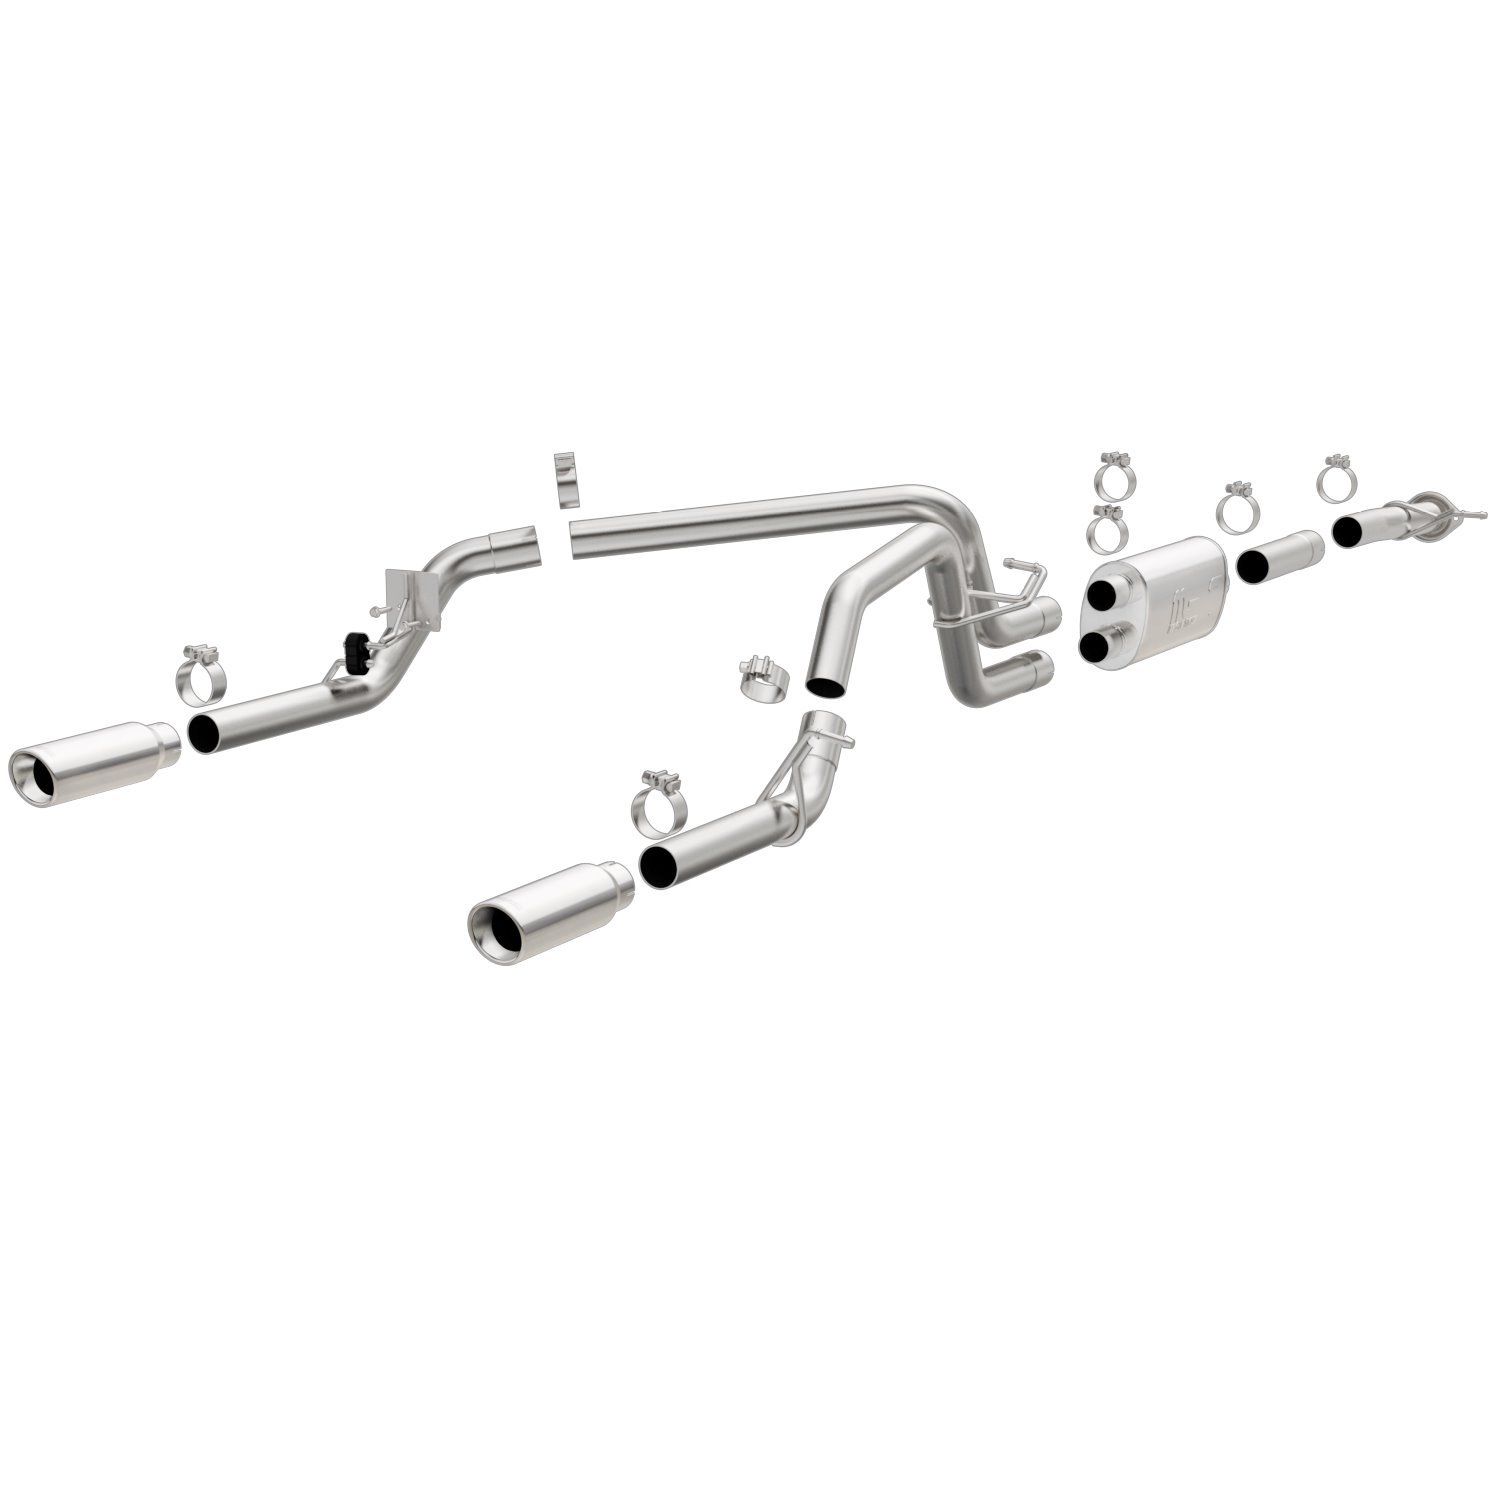 MF Series Cat-Back Exhaust System 2015-2019 Colorado/Canyon 2.5L/3.6L (Crew, 62" Bed)